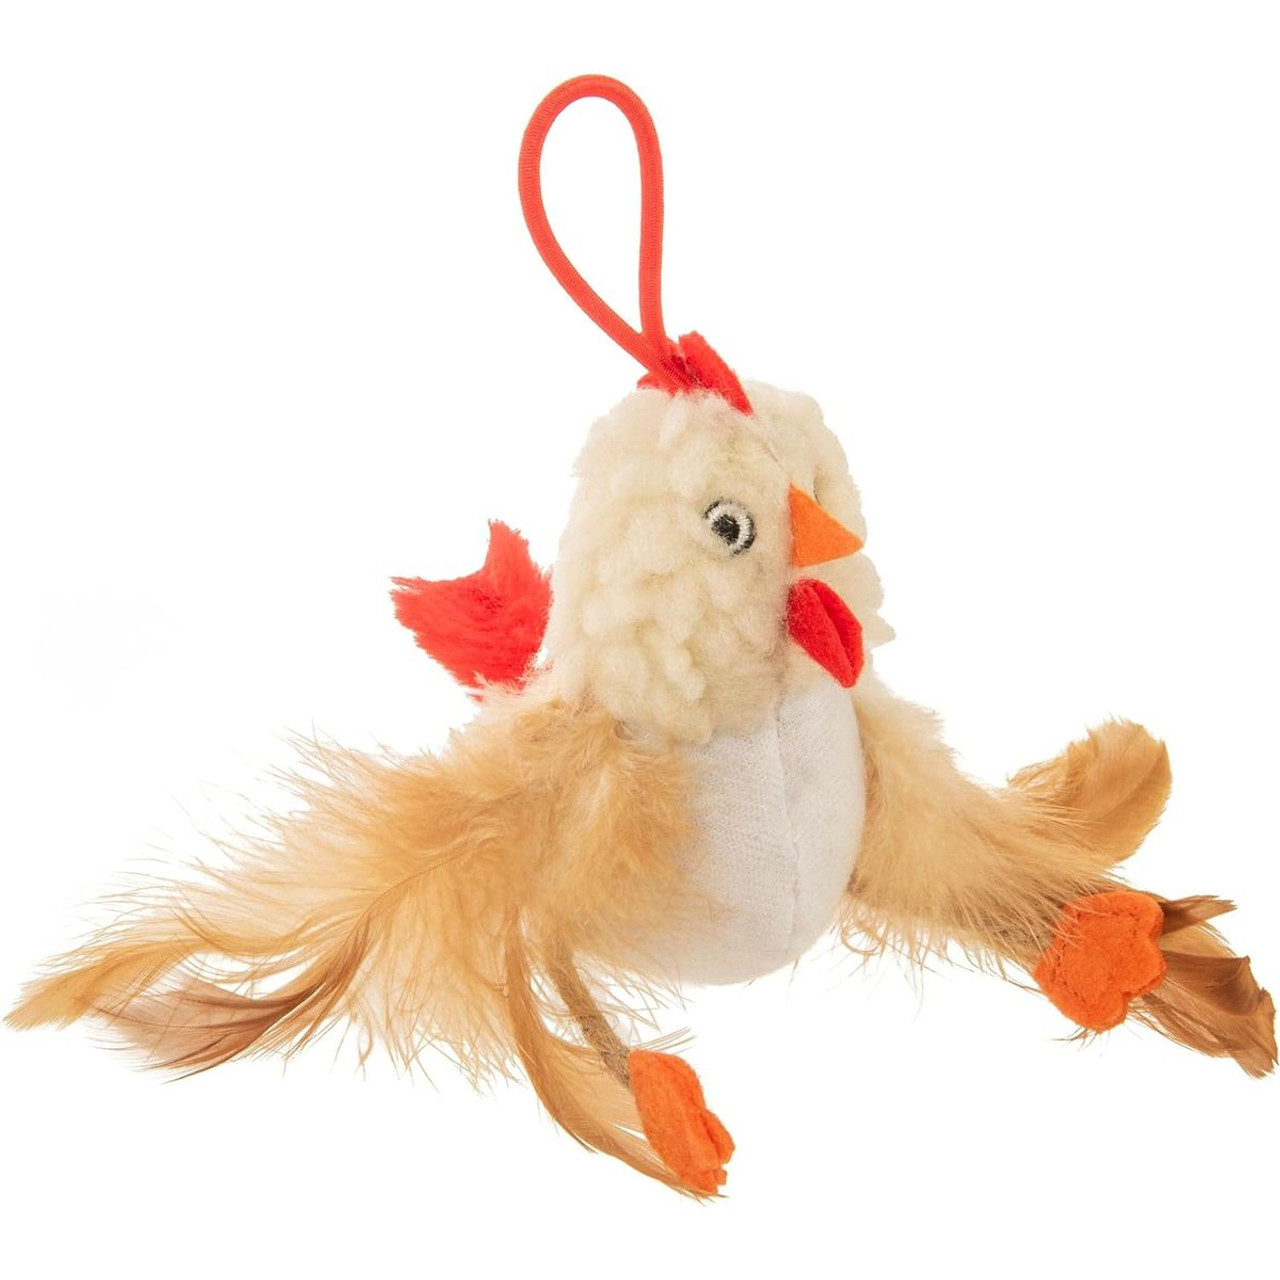 Petlinks® HappyNip™ Flying Chicken™ Launcher Cat Toy product image